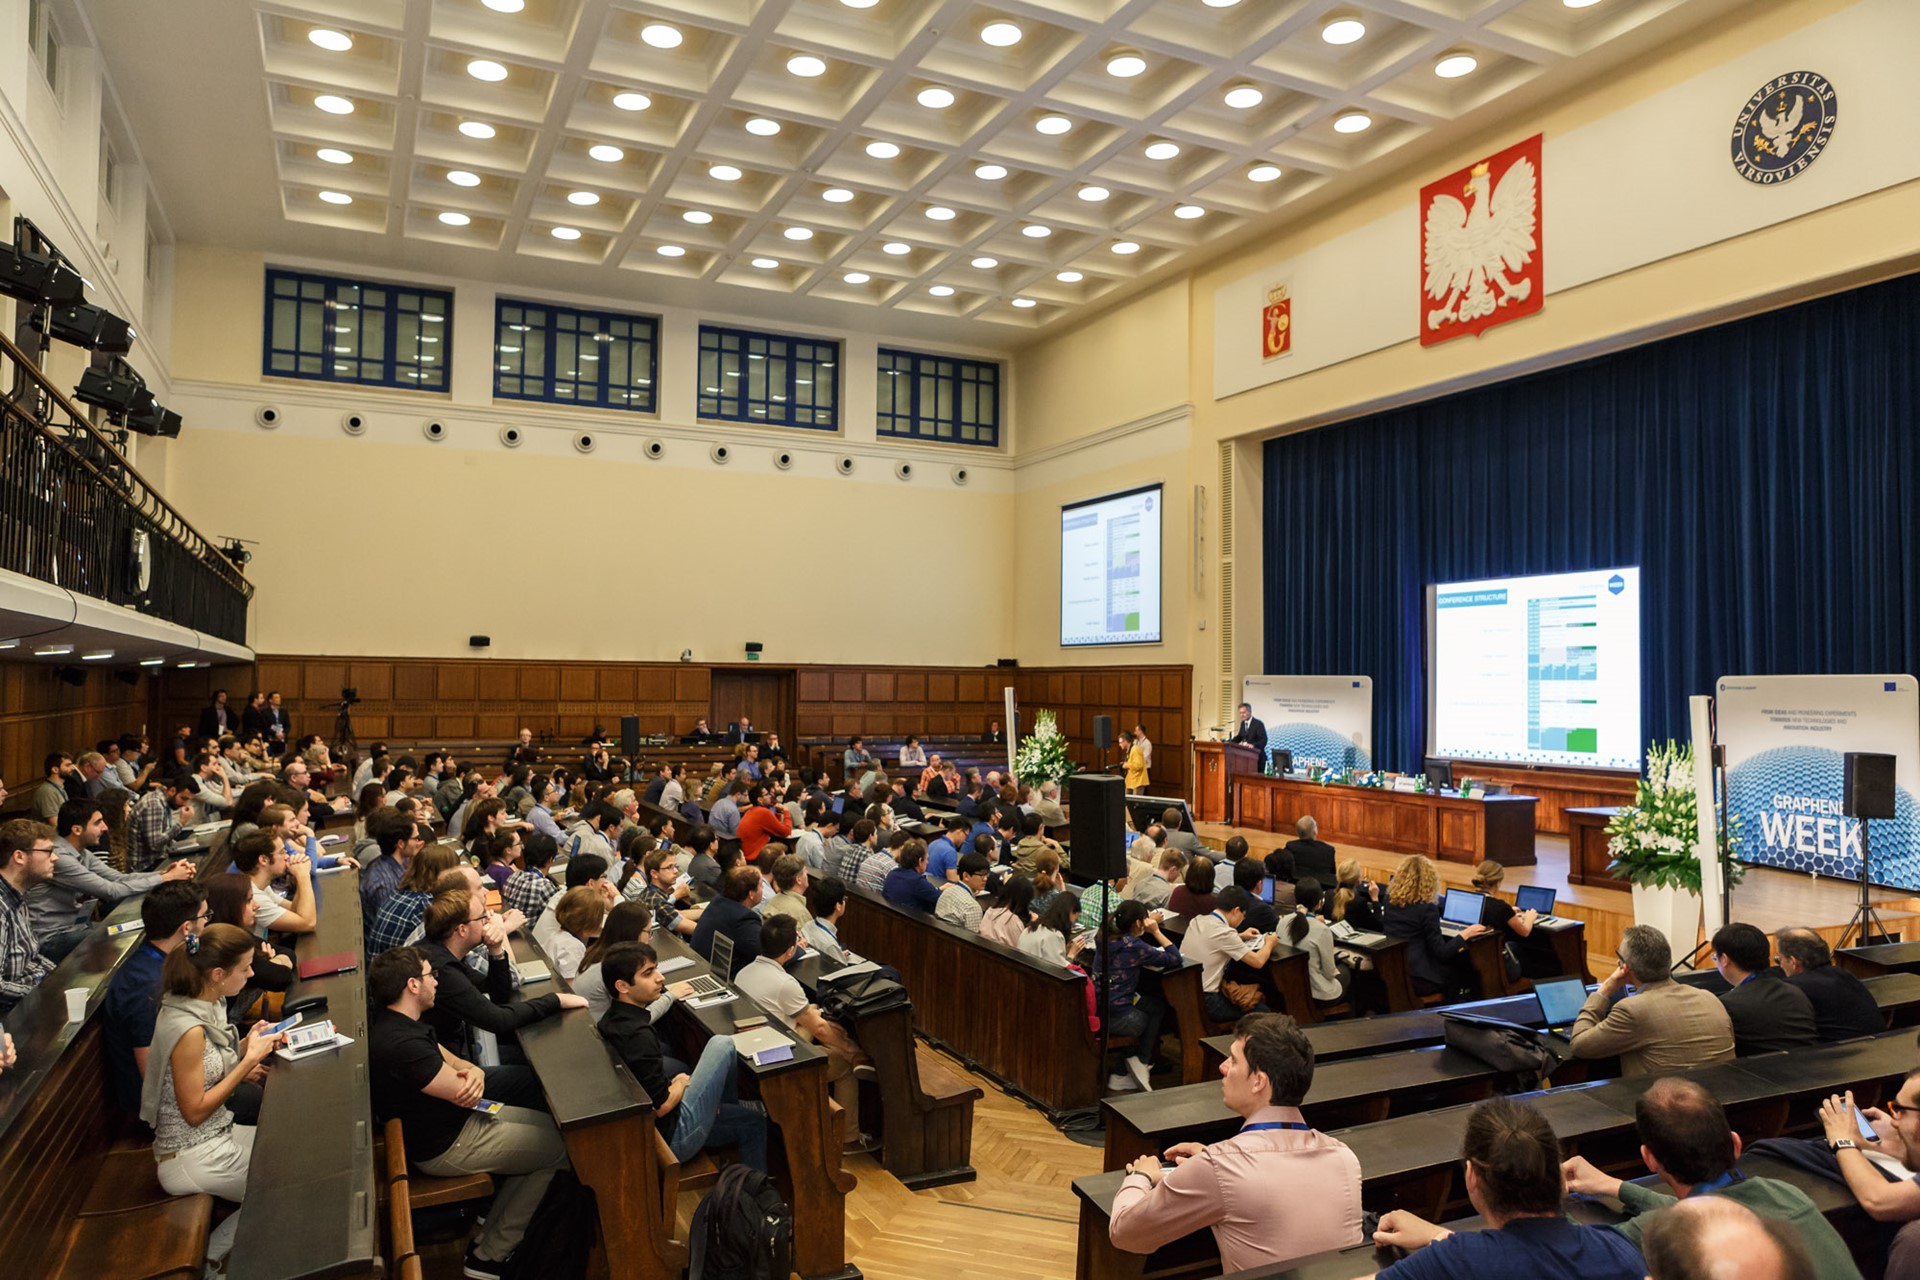 Opening session of the Graphene Week 2016